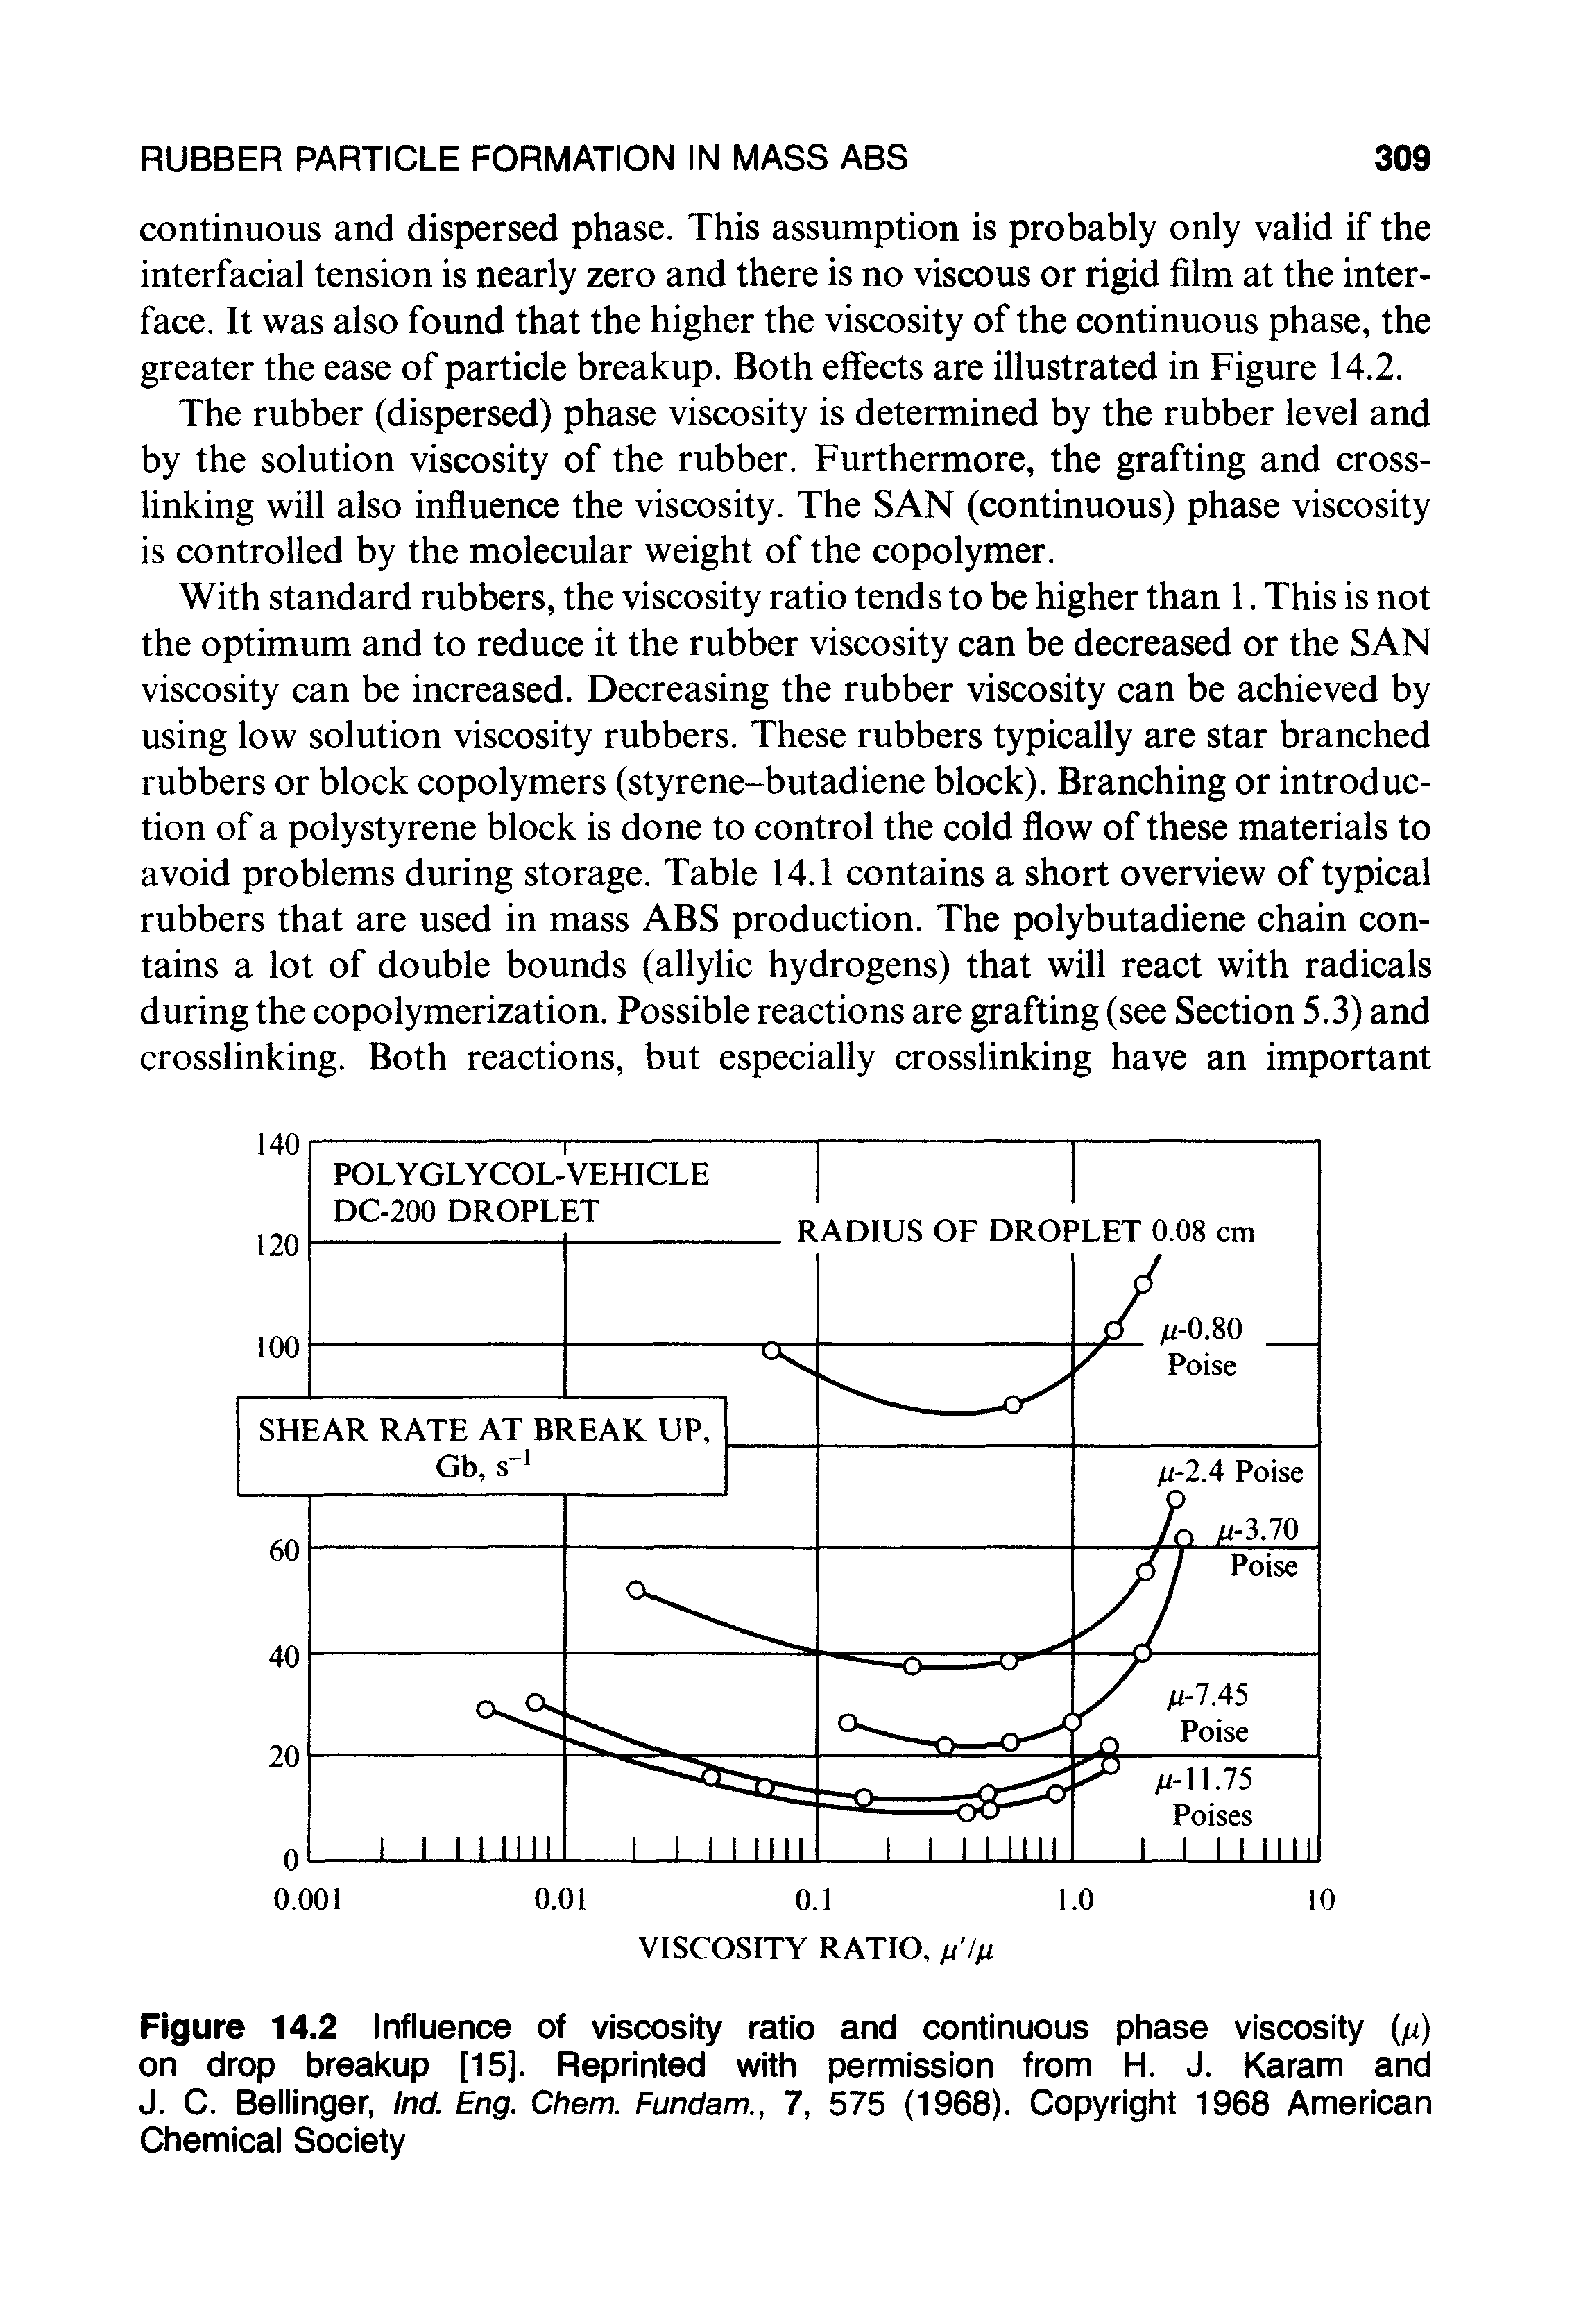 Figure 14.2 Influence of viscosity ratio and continuous phase viscosity (/i) on drop breakup [15]. Reprinted with permission from H. J. Karam and J. C. Bellinger, Ind. Eng. Chem. Fundam., 7, 575 (1968). Copyright 1968 American Chemical Society...